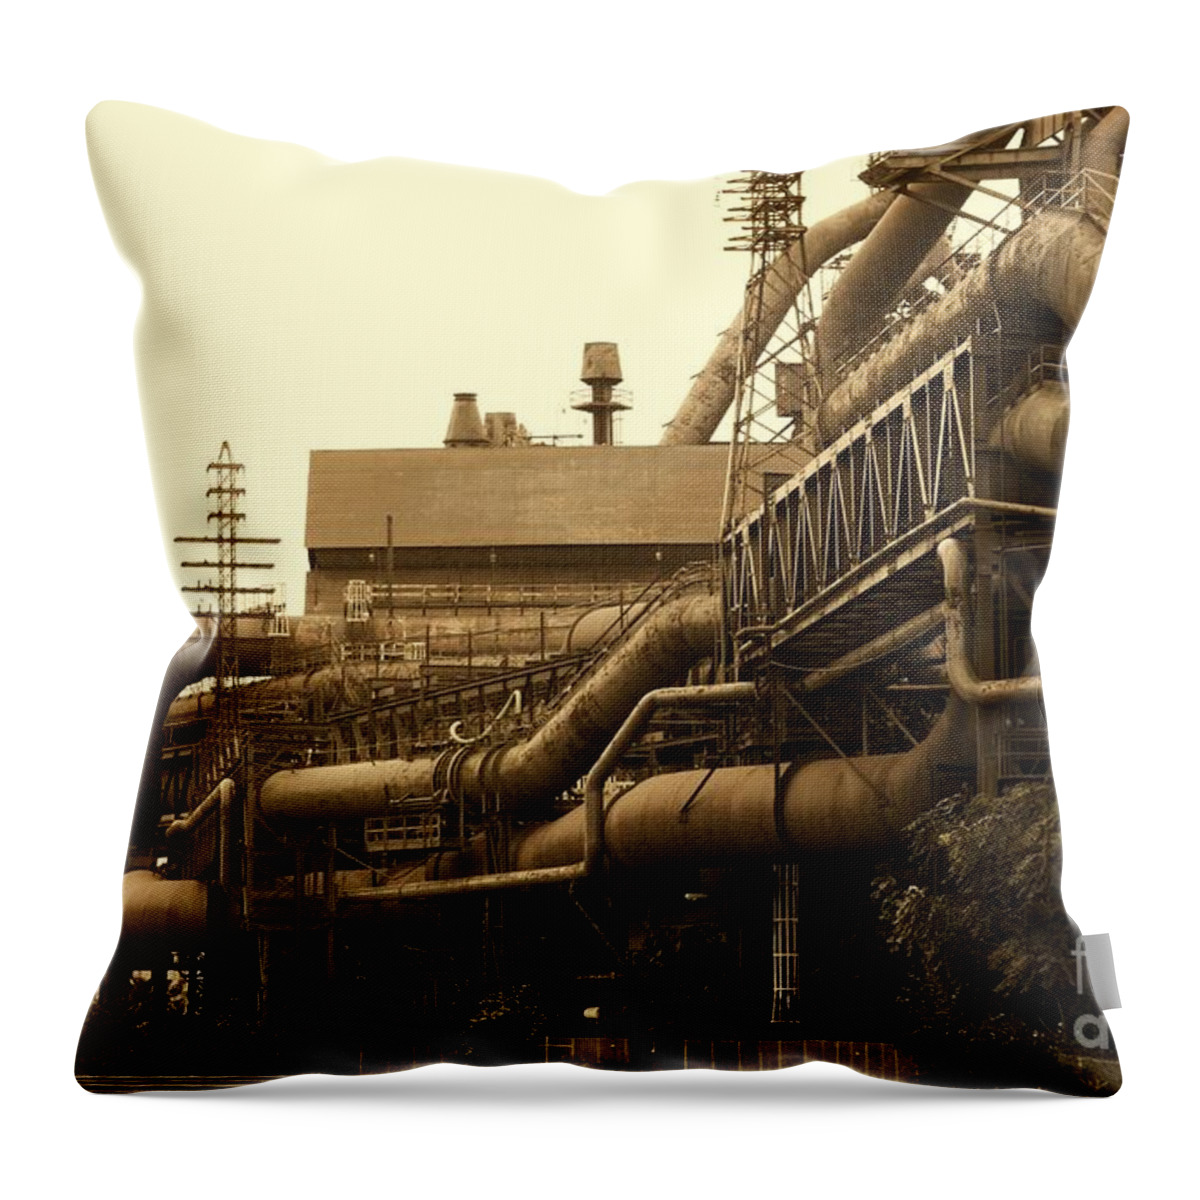 Industry Throw Pillow featuring the photograph The Worm Passageways by Marcia Lee Jones